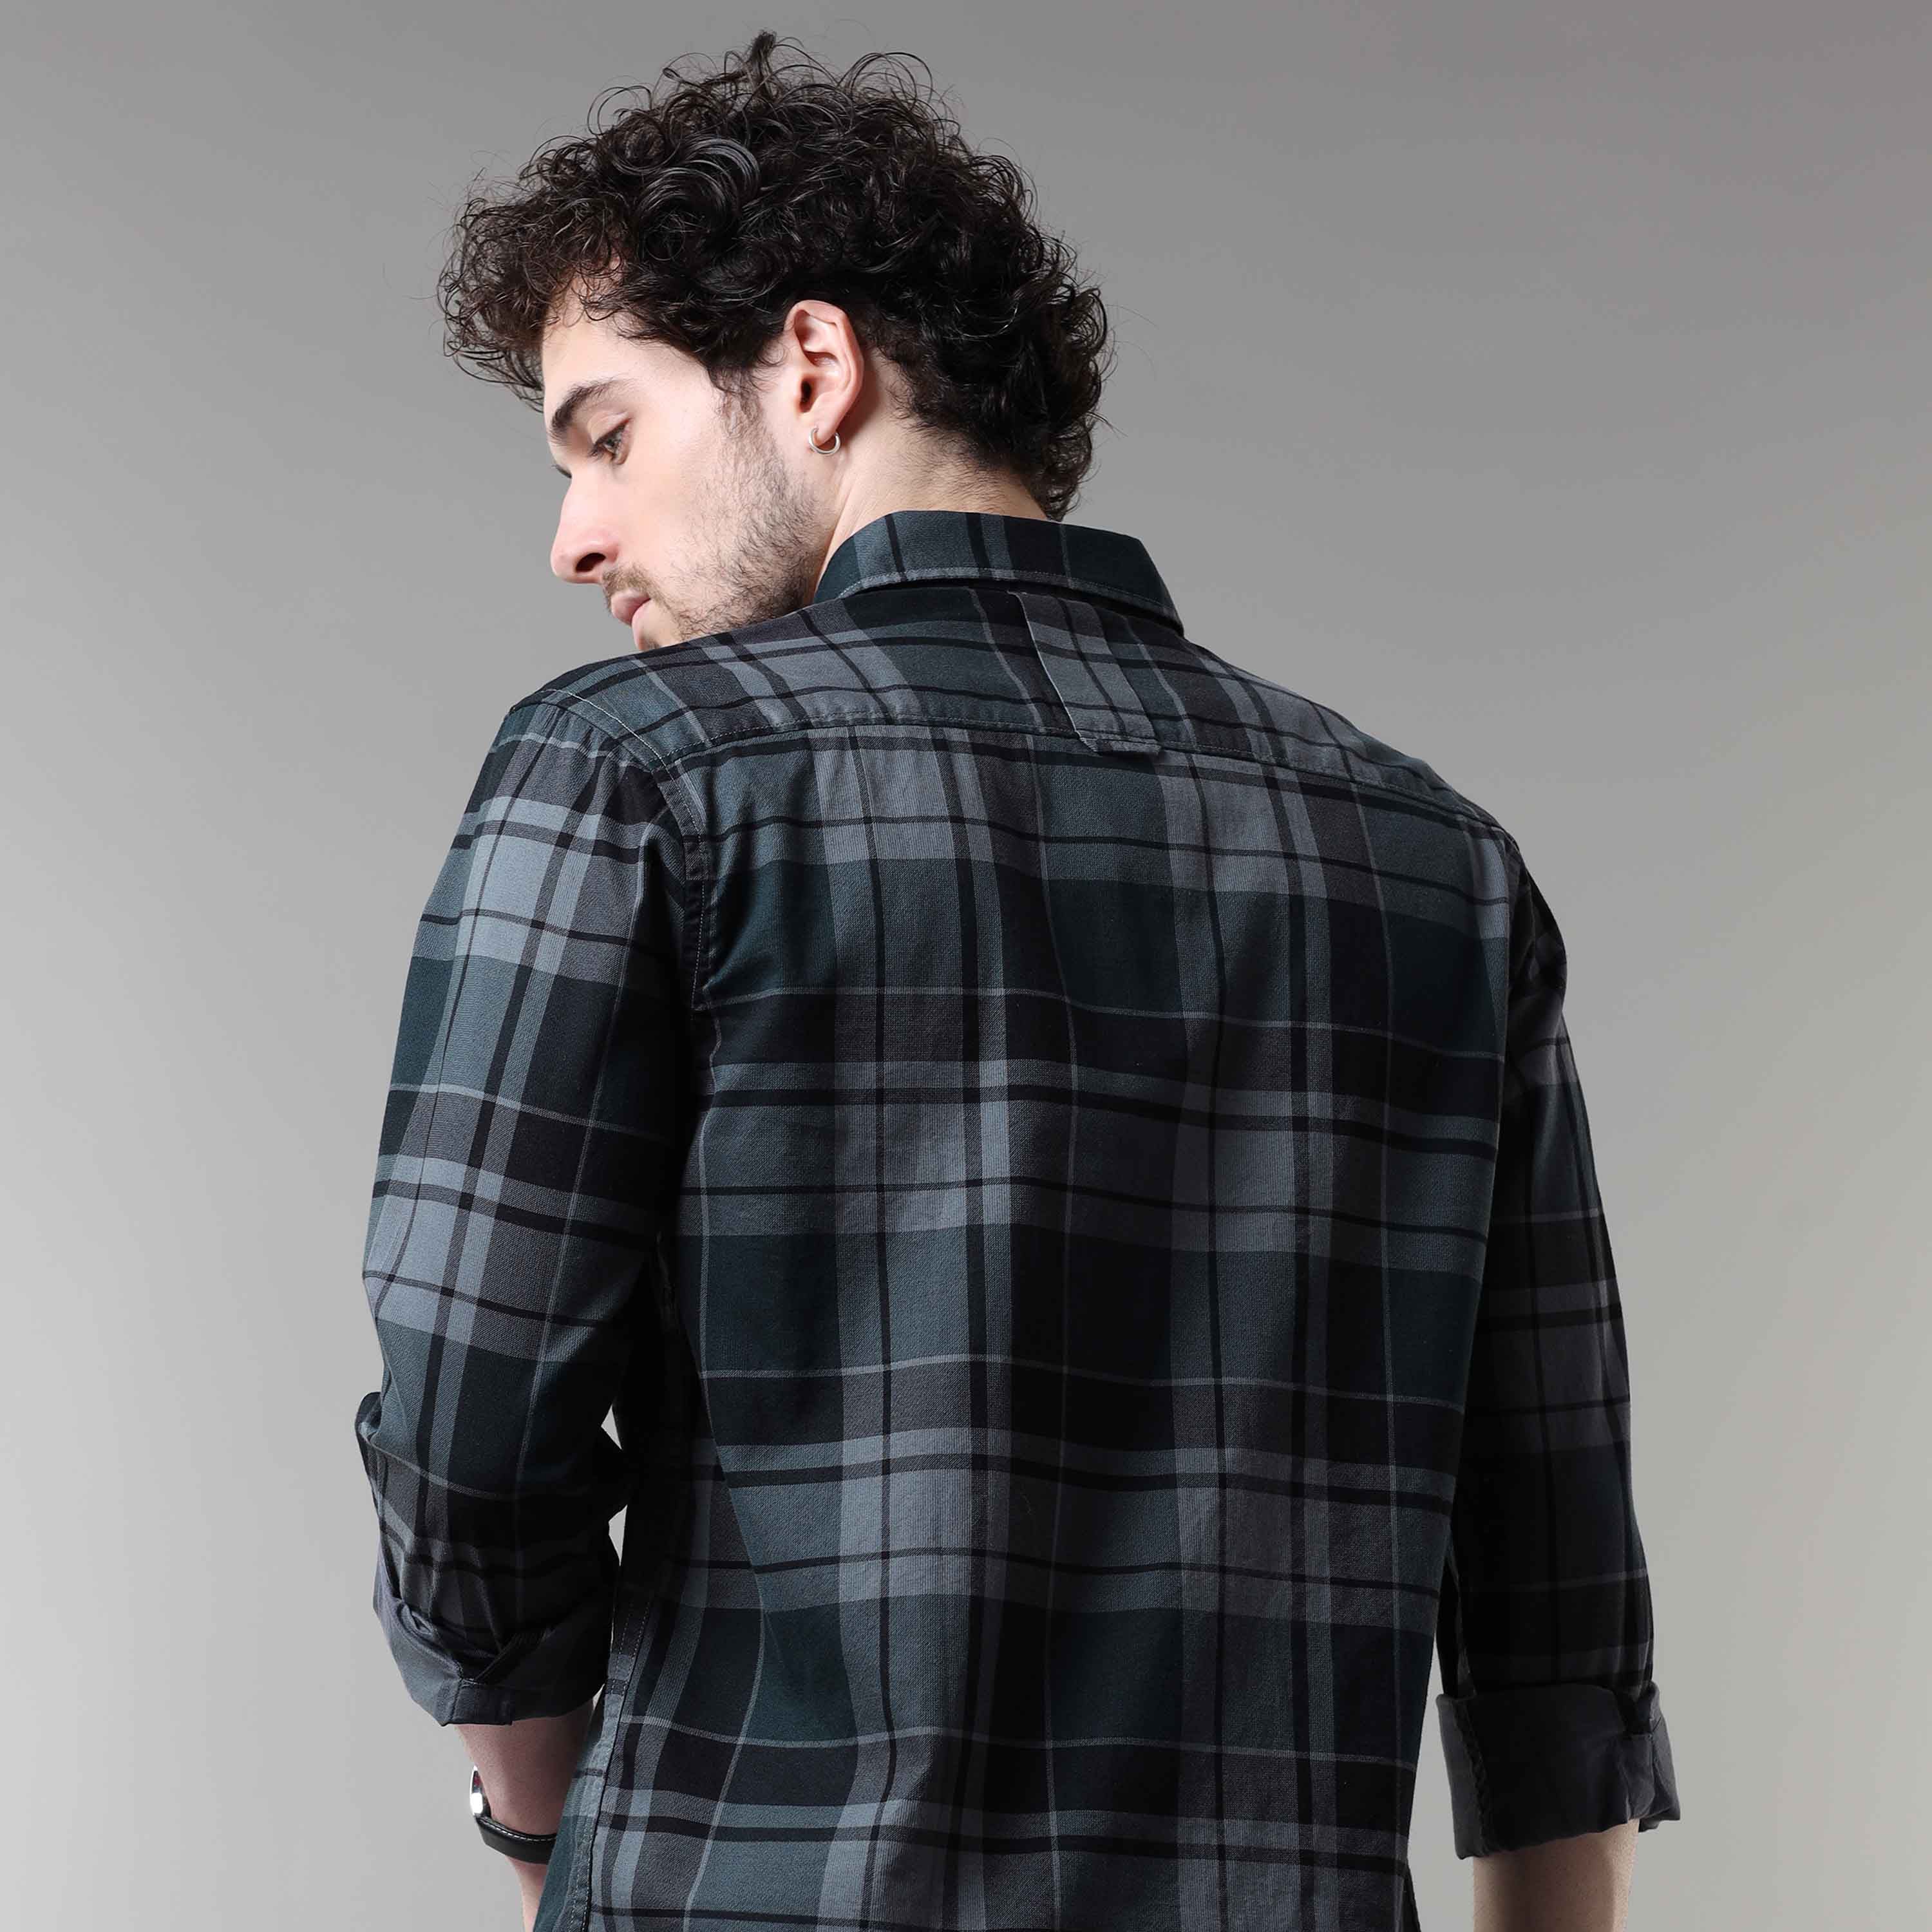 Shop Corduroy Check Double Pocket Shirts Online India Rs. 1399.00